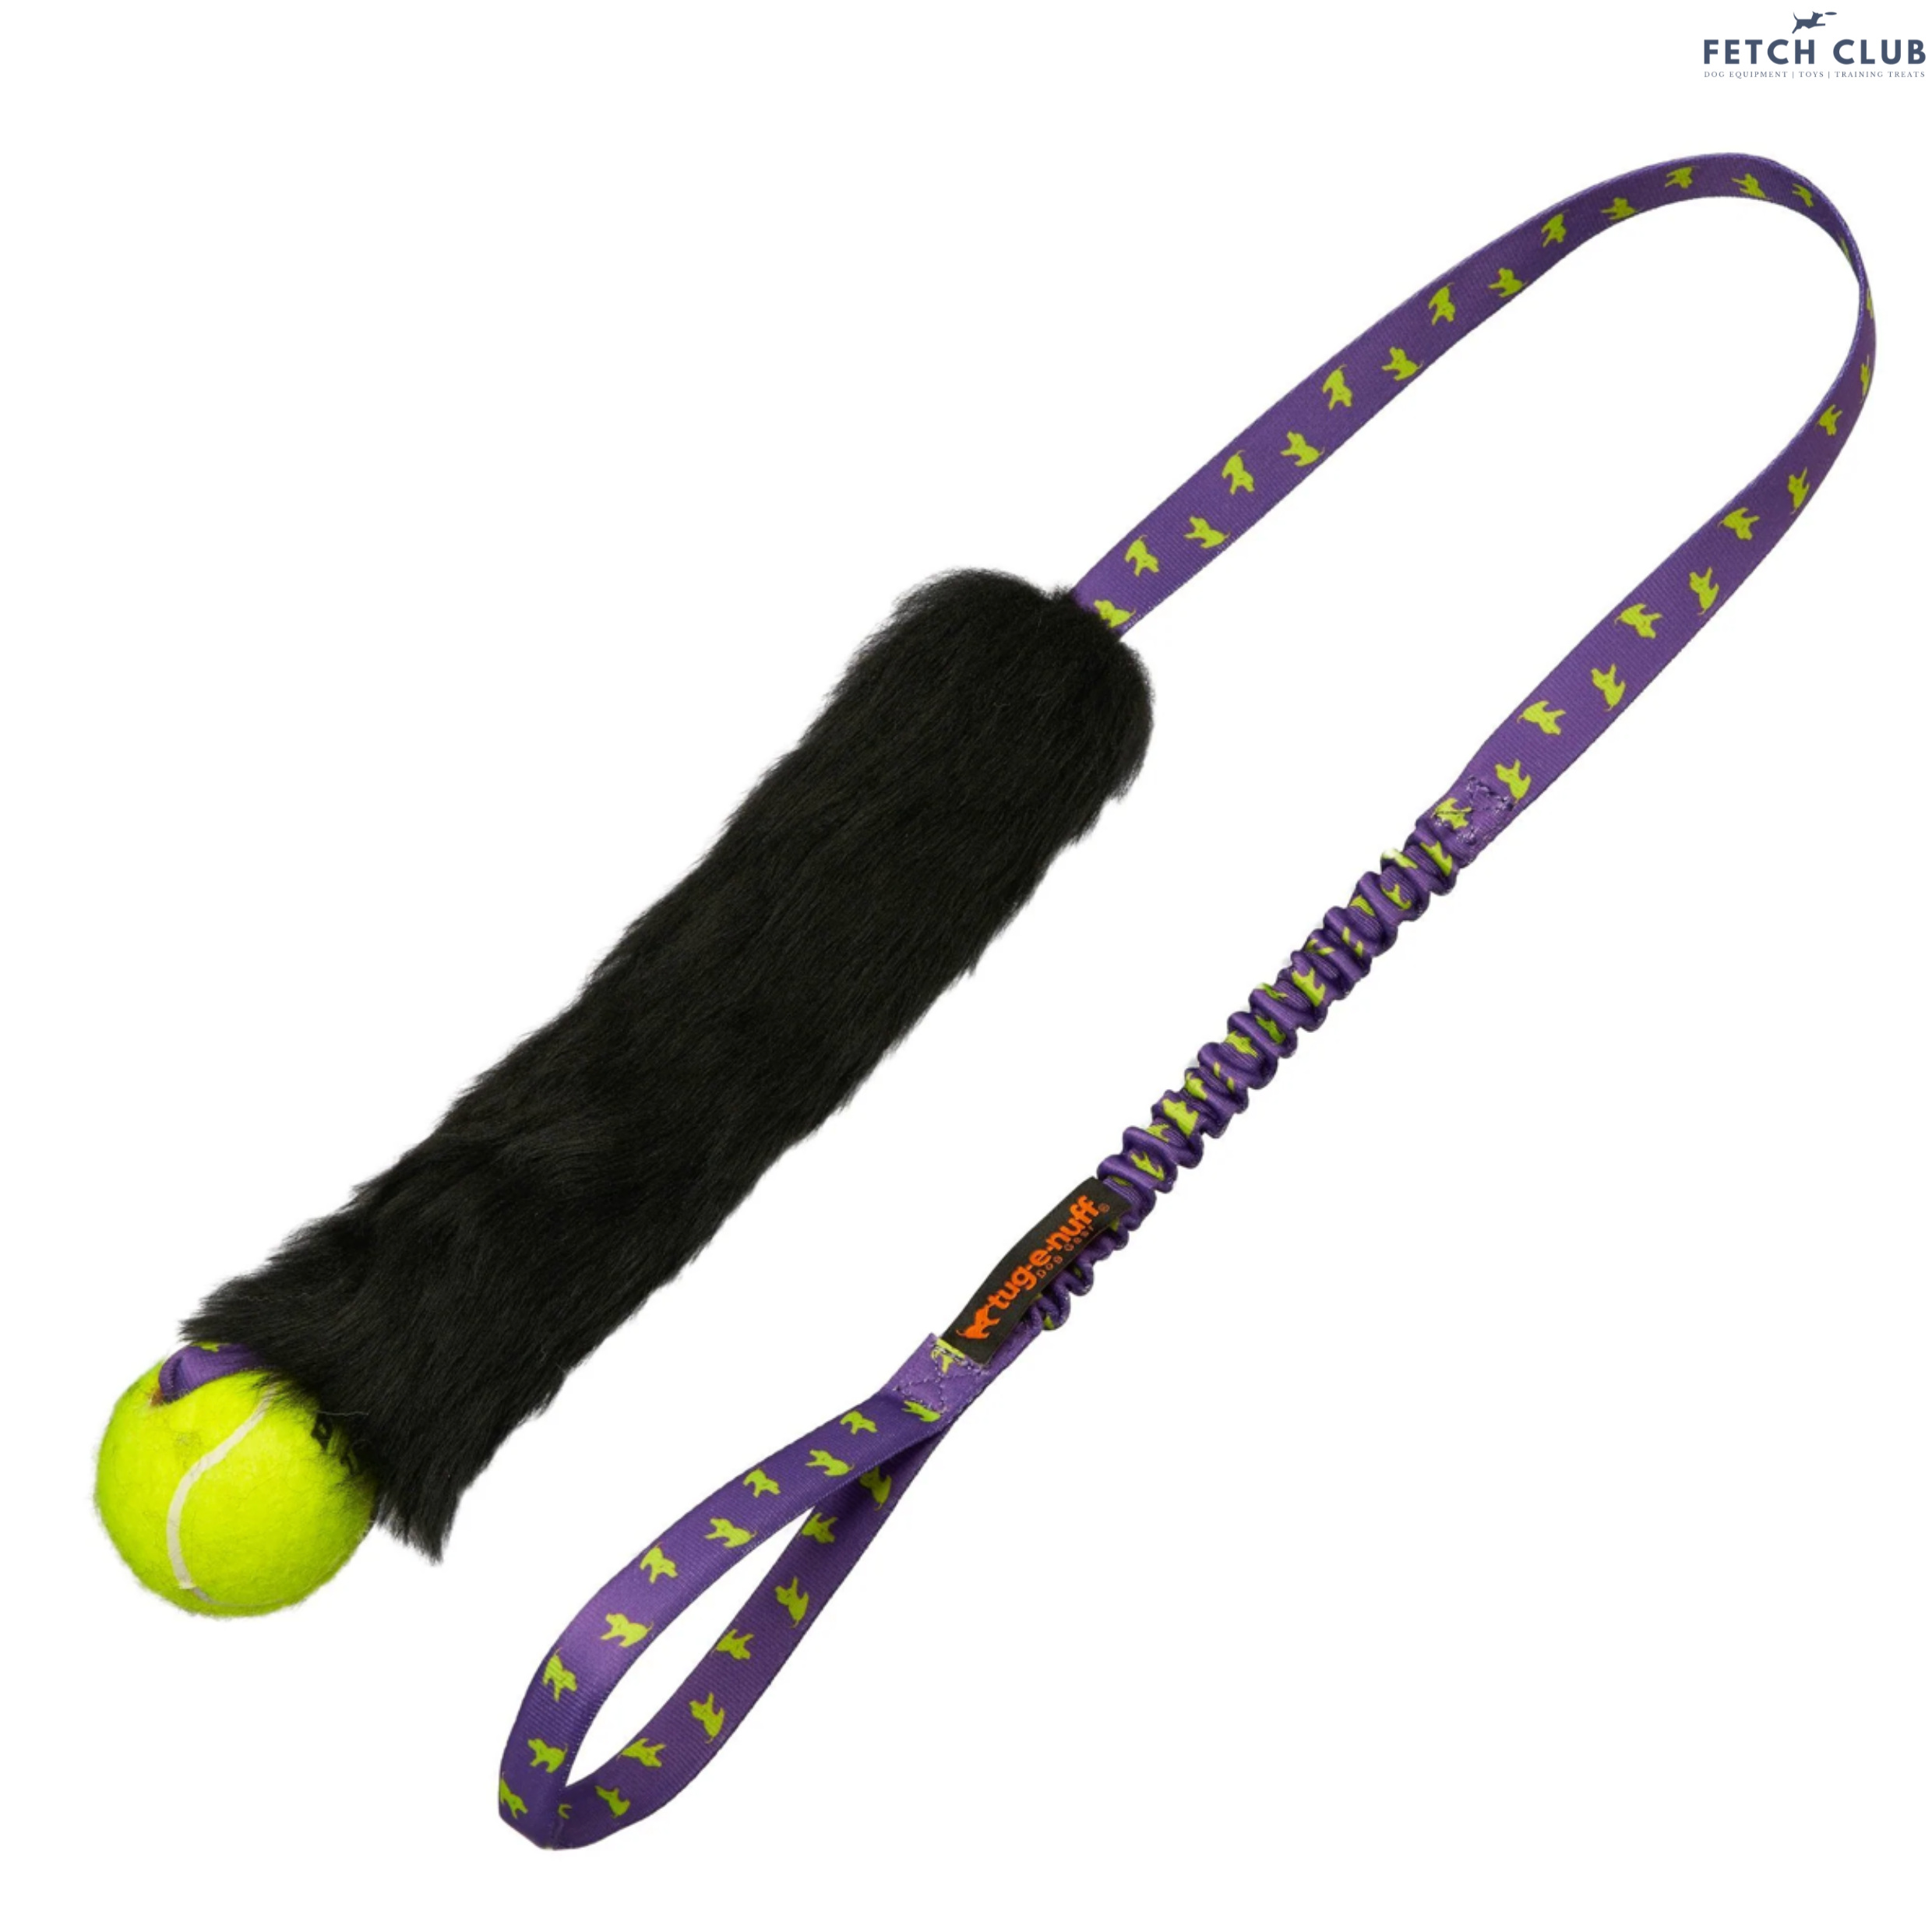 Tug-E-Nuff Sheepskin Bungee Chaser with Tennis Ball